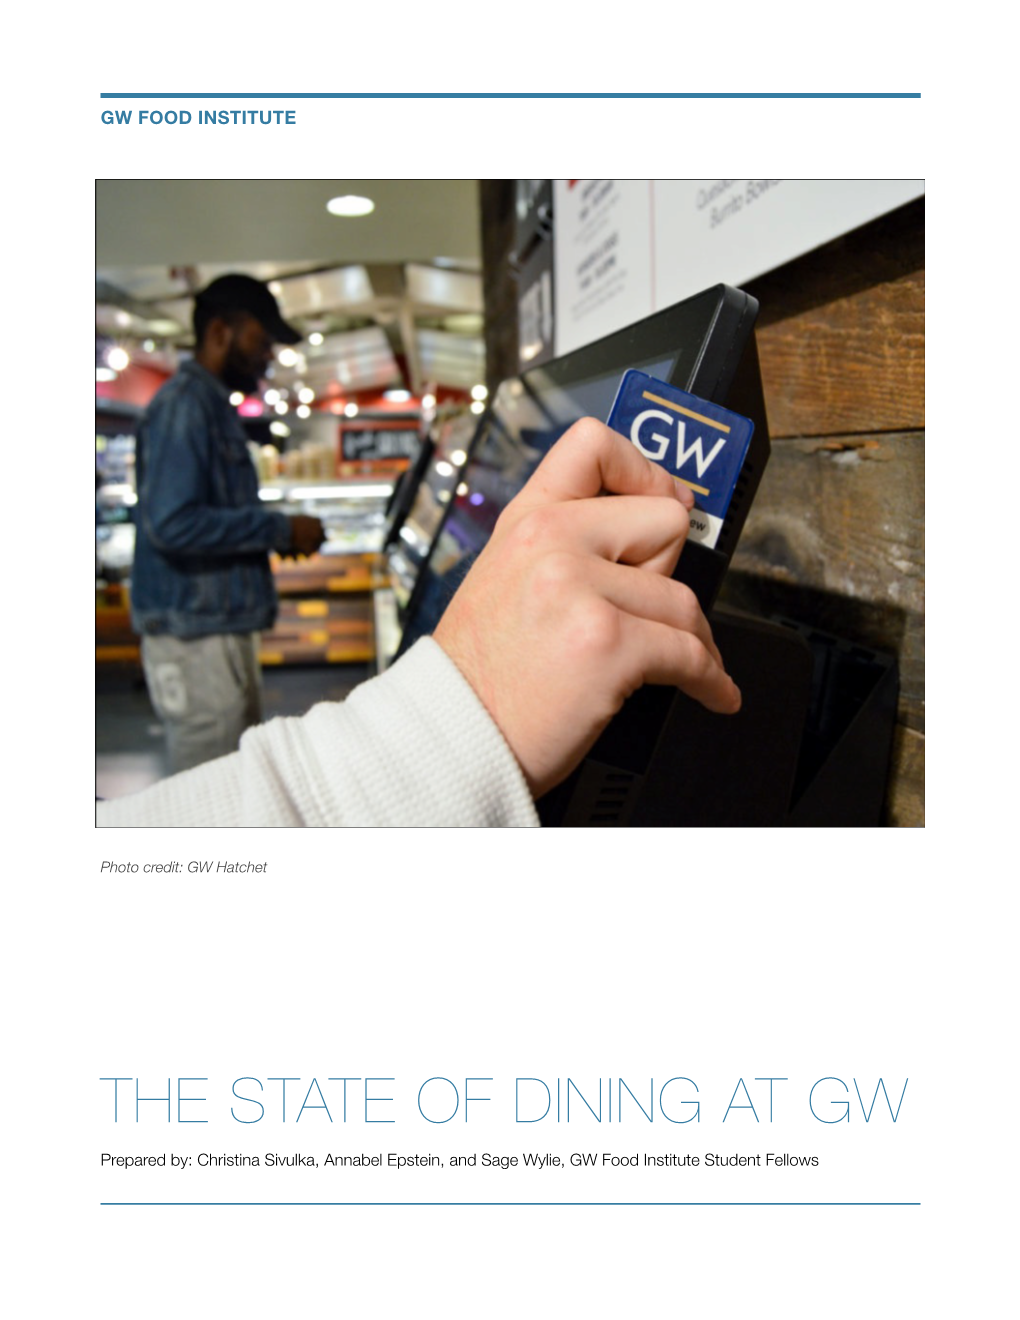 The State of Dining at Gw